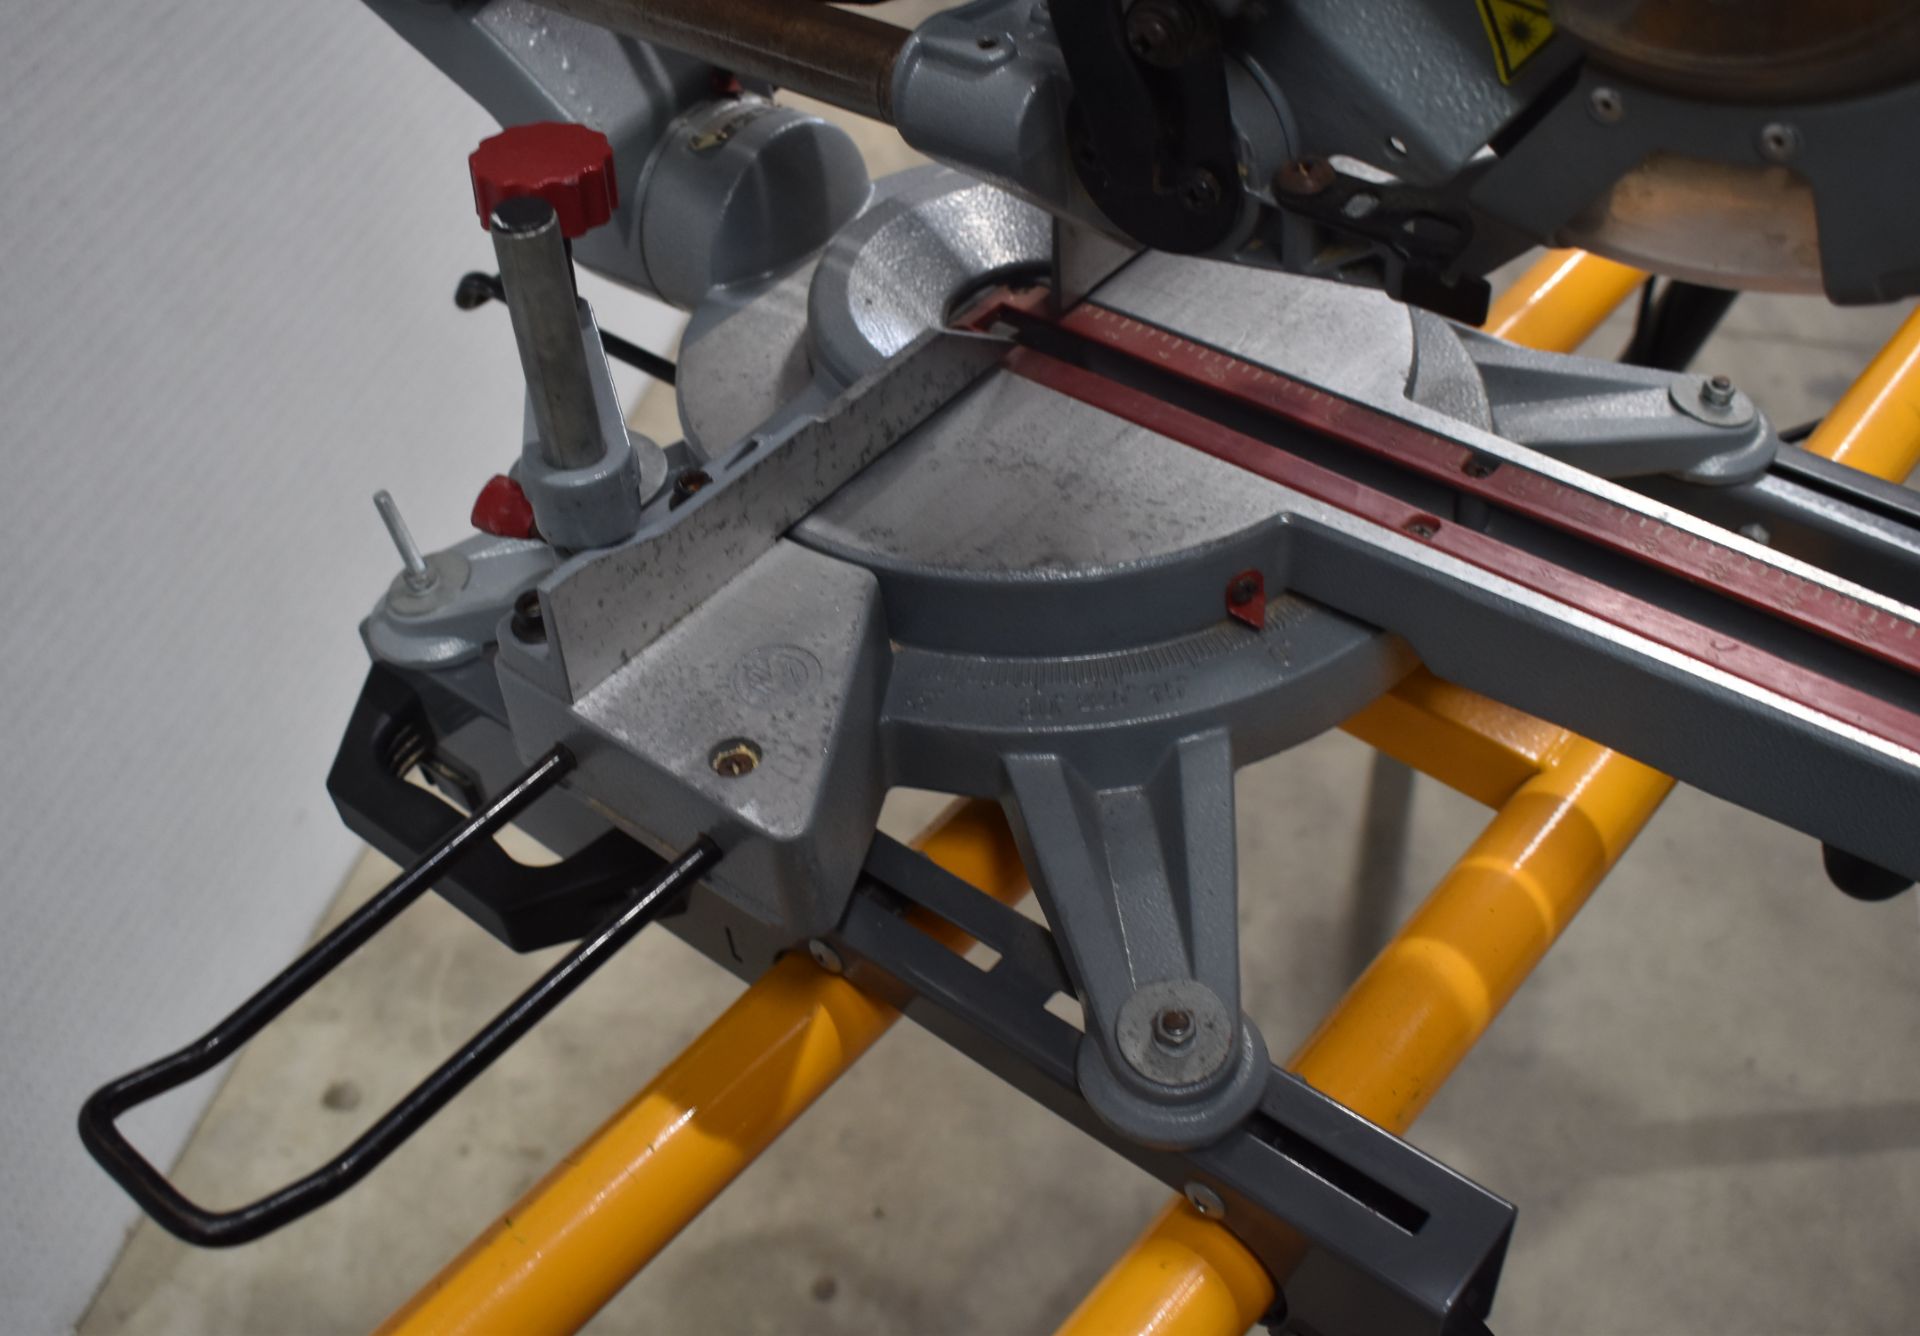 1 x JCB Mitre Saw Stand With Performance Power PSMS210L Sliding Mitre Saw - Ref: K285 - CL905 - - Image 9 of 16